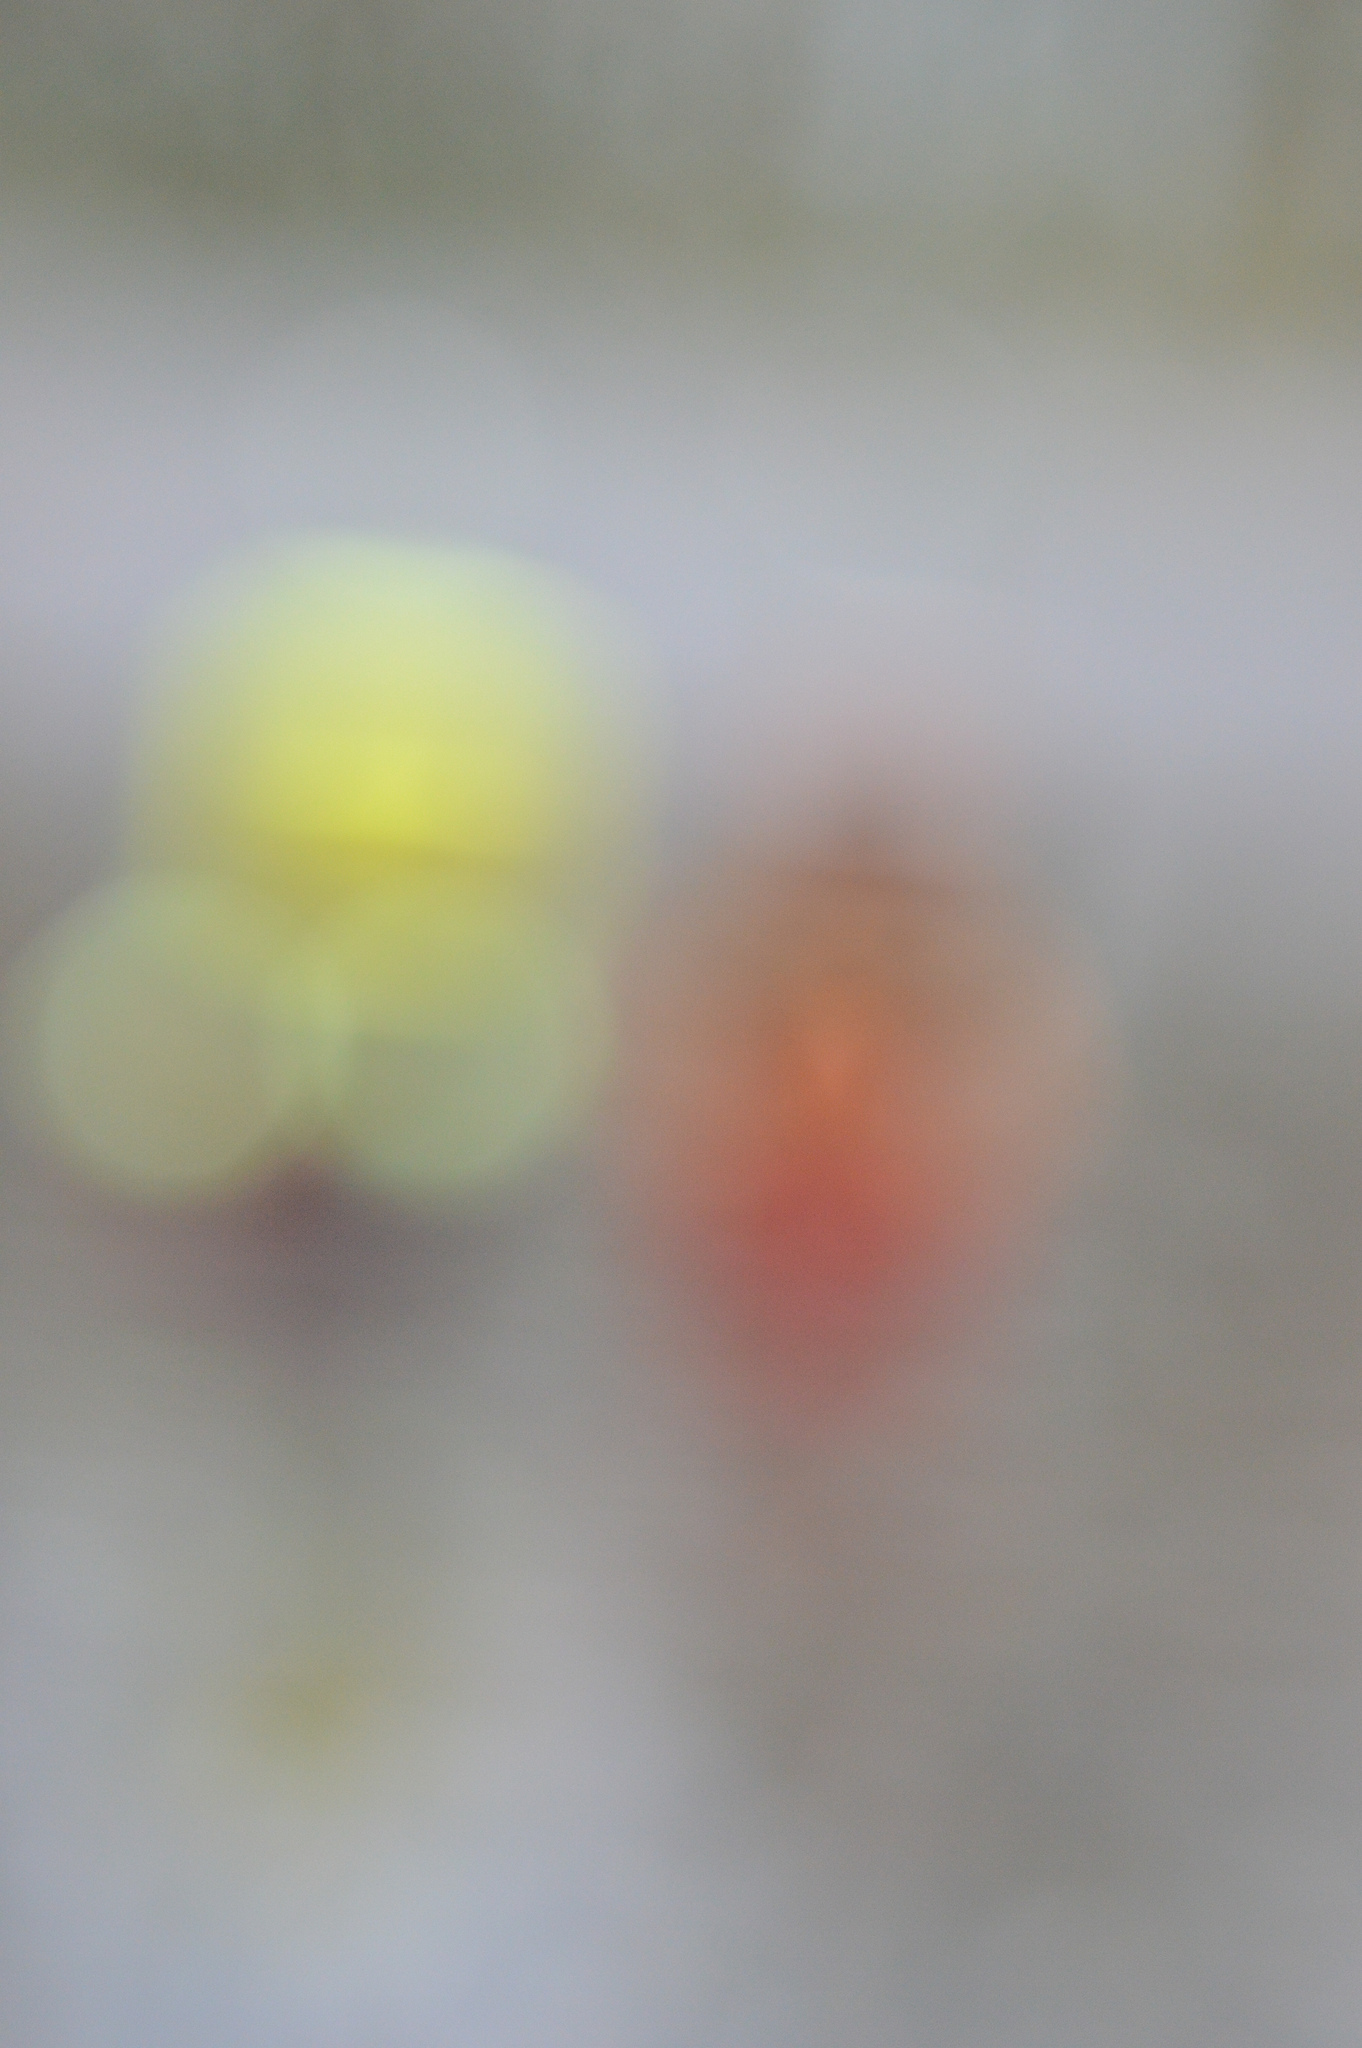 Toys out of focus